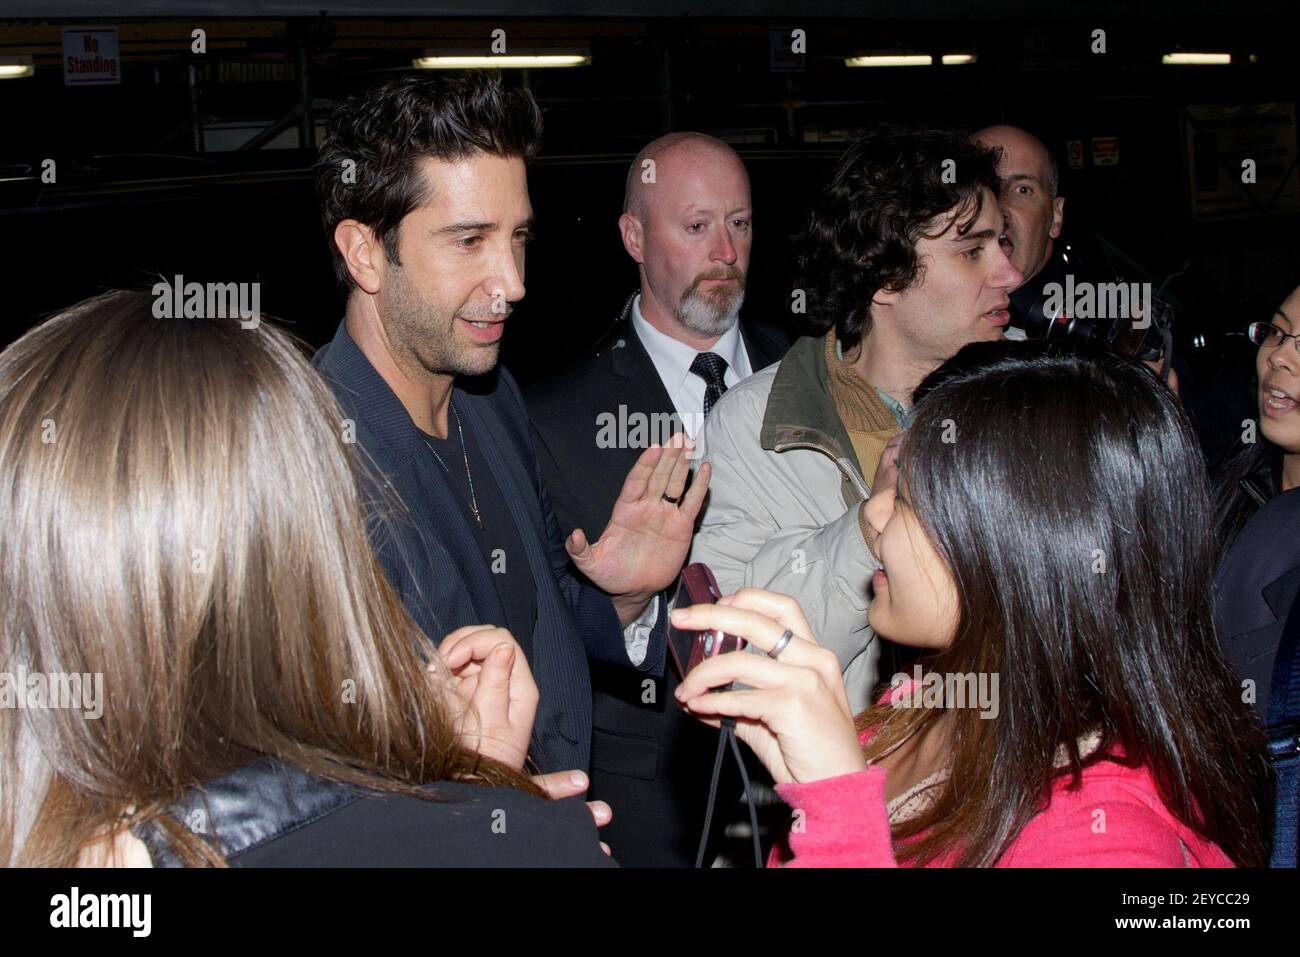 David Schwimmer attends the Pre-Met Ball screening of 'The Great Gatsby' at The Museum of Modern Art on May 5, 2013 in New York City( Photo by Alberto Reyes/Sipa USA ) Stock Photo